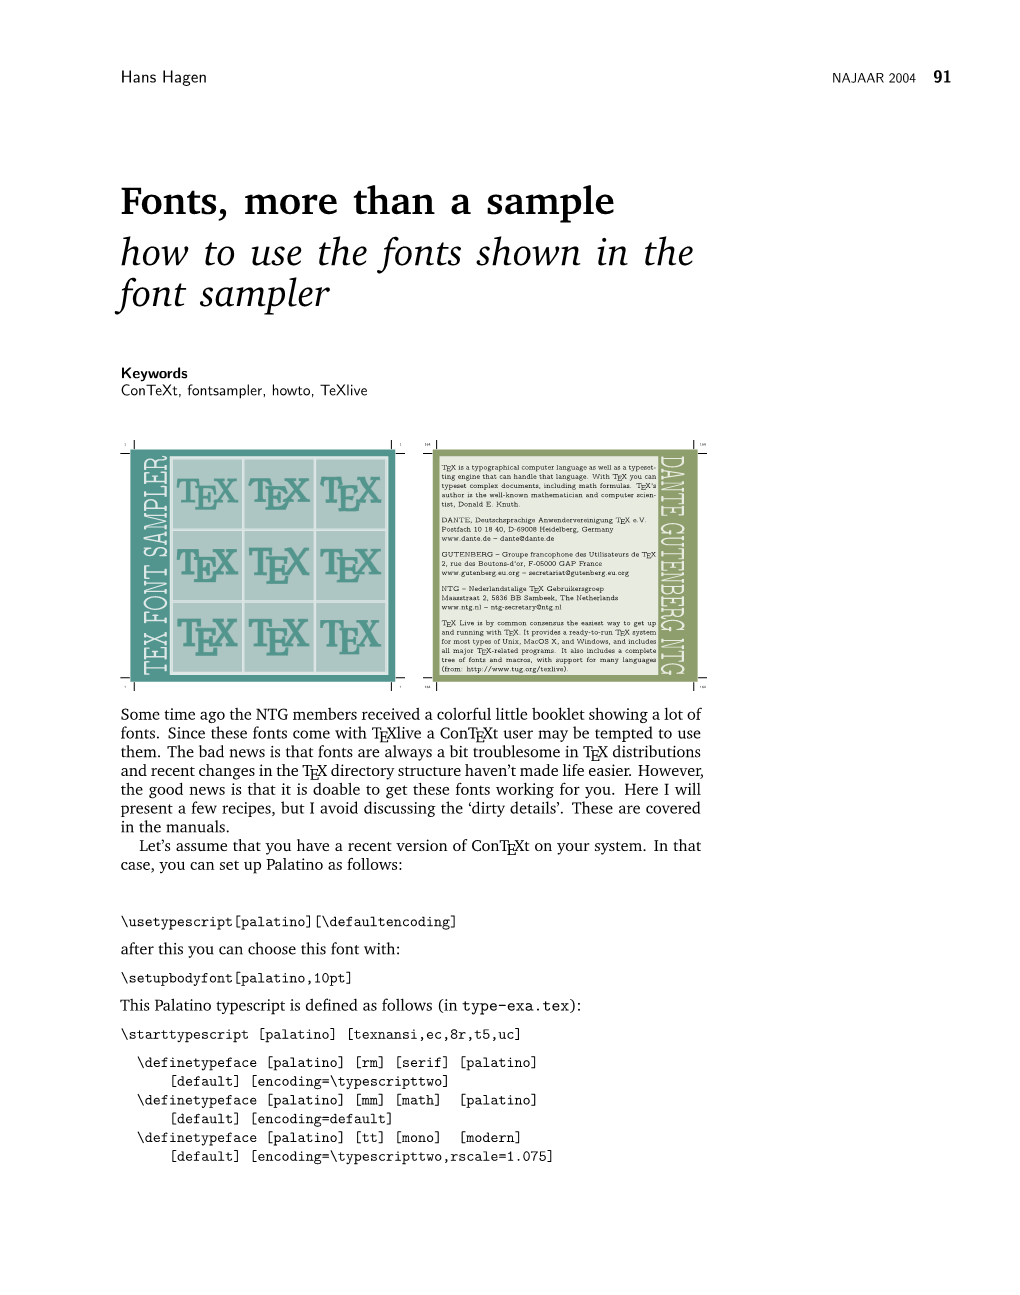 Fonts, More Than a Sample How to Use the Fonts Shown in the Font Sampler